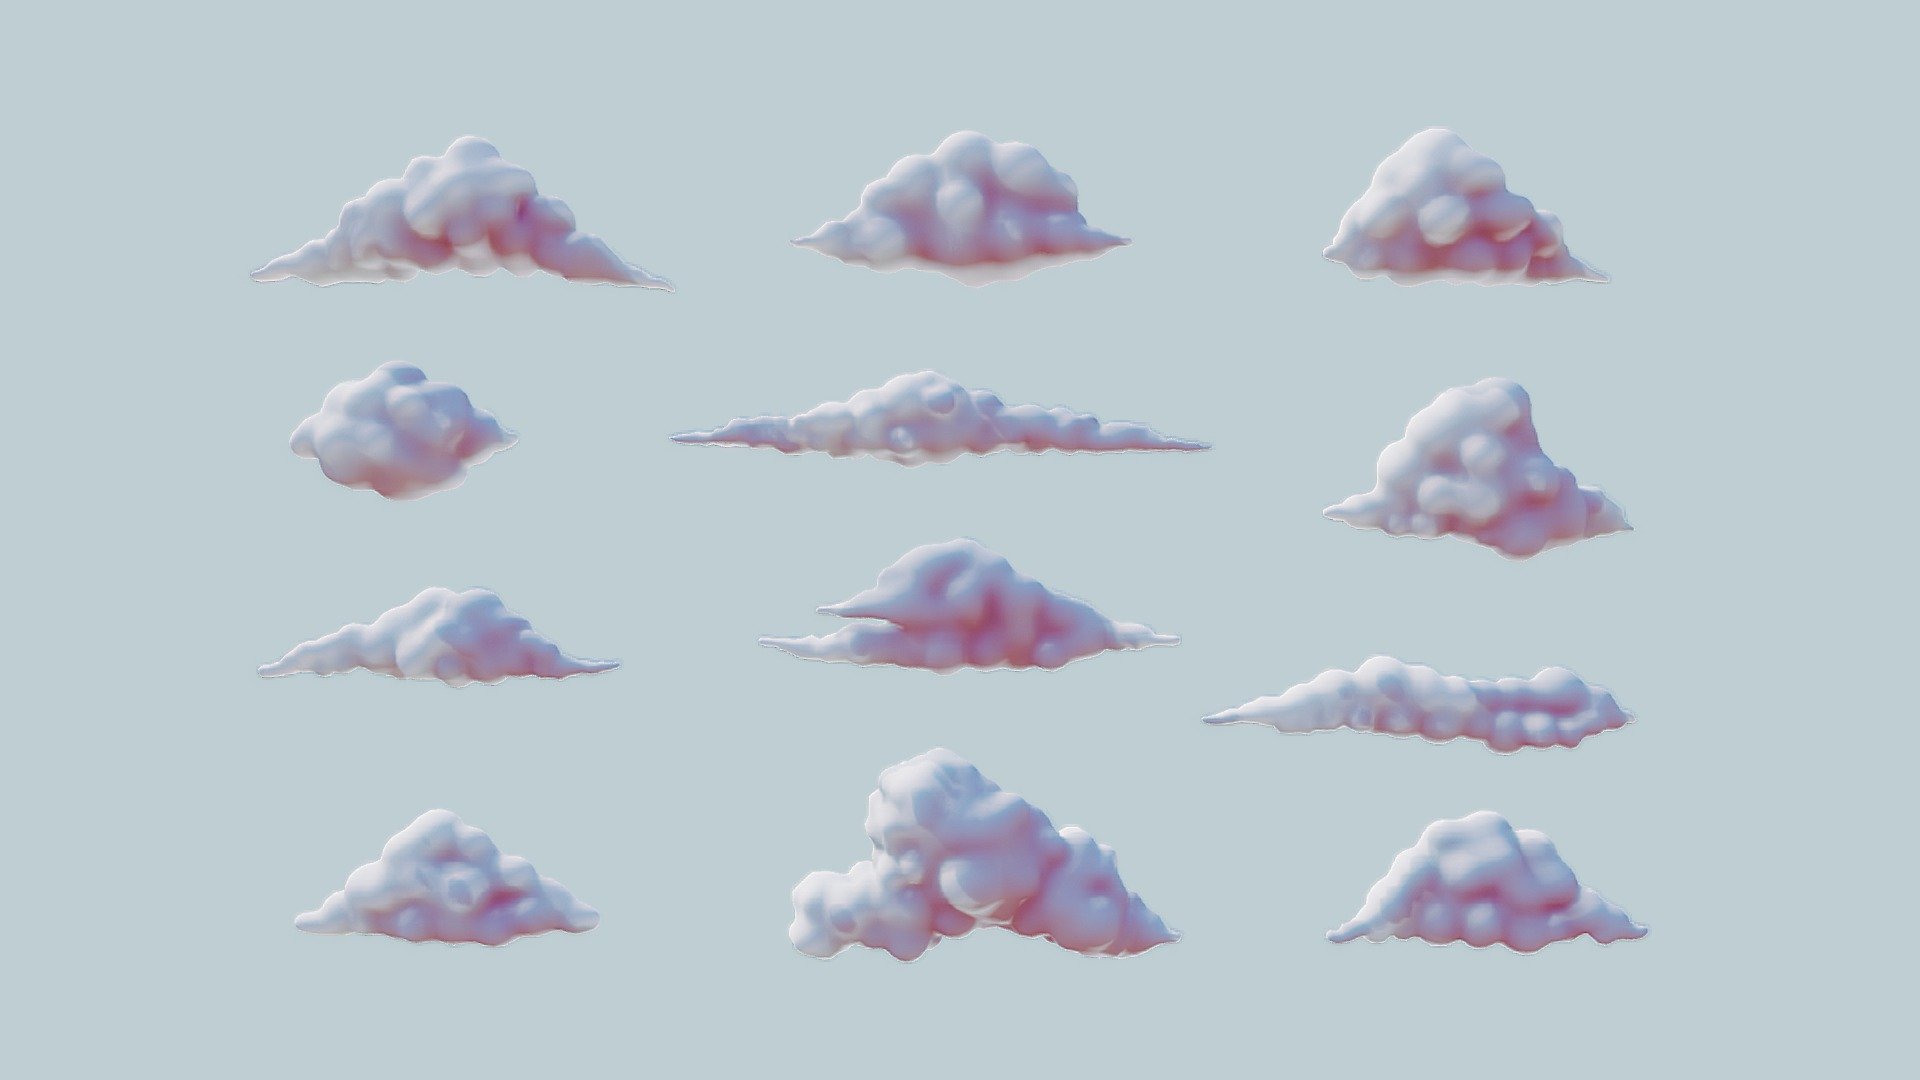 Clouds Pack - 12 in 1




Format: FBX, OBJ, MTL, STL, glb, glTF, Blender v3.5.0

Optimized UVs (Non-Overlapping UVs)

PBR Textures | 2048x2048 - 4096x4096 | (2K,4K Jpeg)

Base Color (Albedo)

Normal Map

AO Map

Metallic Map

Roughness Map

New Products

Piercing Mega Pack - 100 Pieces in 1 

Stylized Tree Pack

Keys Pack - 10 in 1 

Mortar and Pestle Pack - 4 in 1

Bottle Pack - 20 in 1

Potion Pack - 12 in 1

Water Drop Pack - 30 in 1

Paper Bag Pack - 9 in 1

Cardboard Box Pack - 8 in 1

Basket Pack - 9 in 1

Map Pointer Pack - 12 in 1 - Clouds Pack - 12 in 1 - Buy Royalty Free 3D model by Nima (@h3ydari96) 3d model